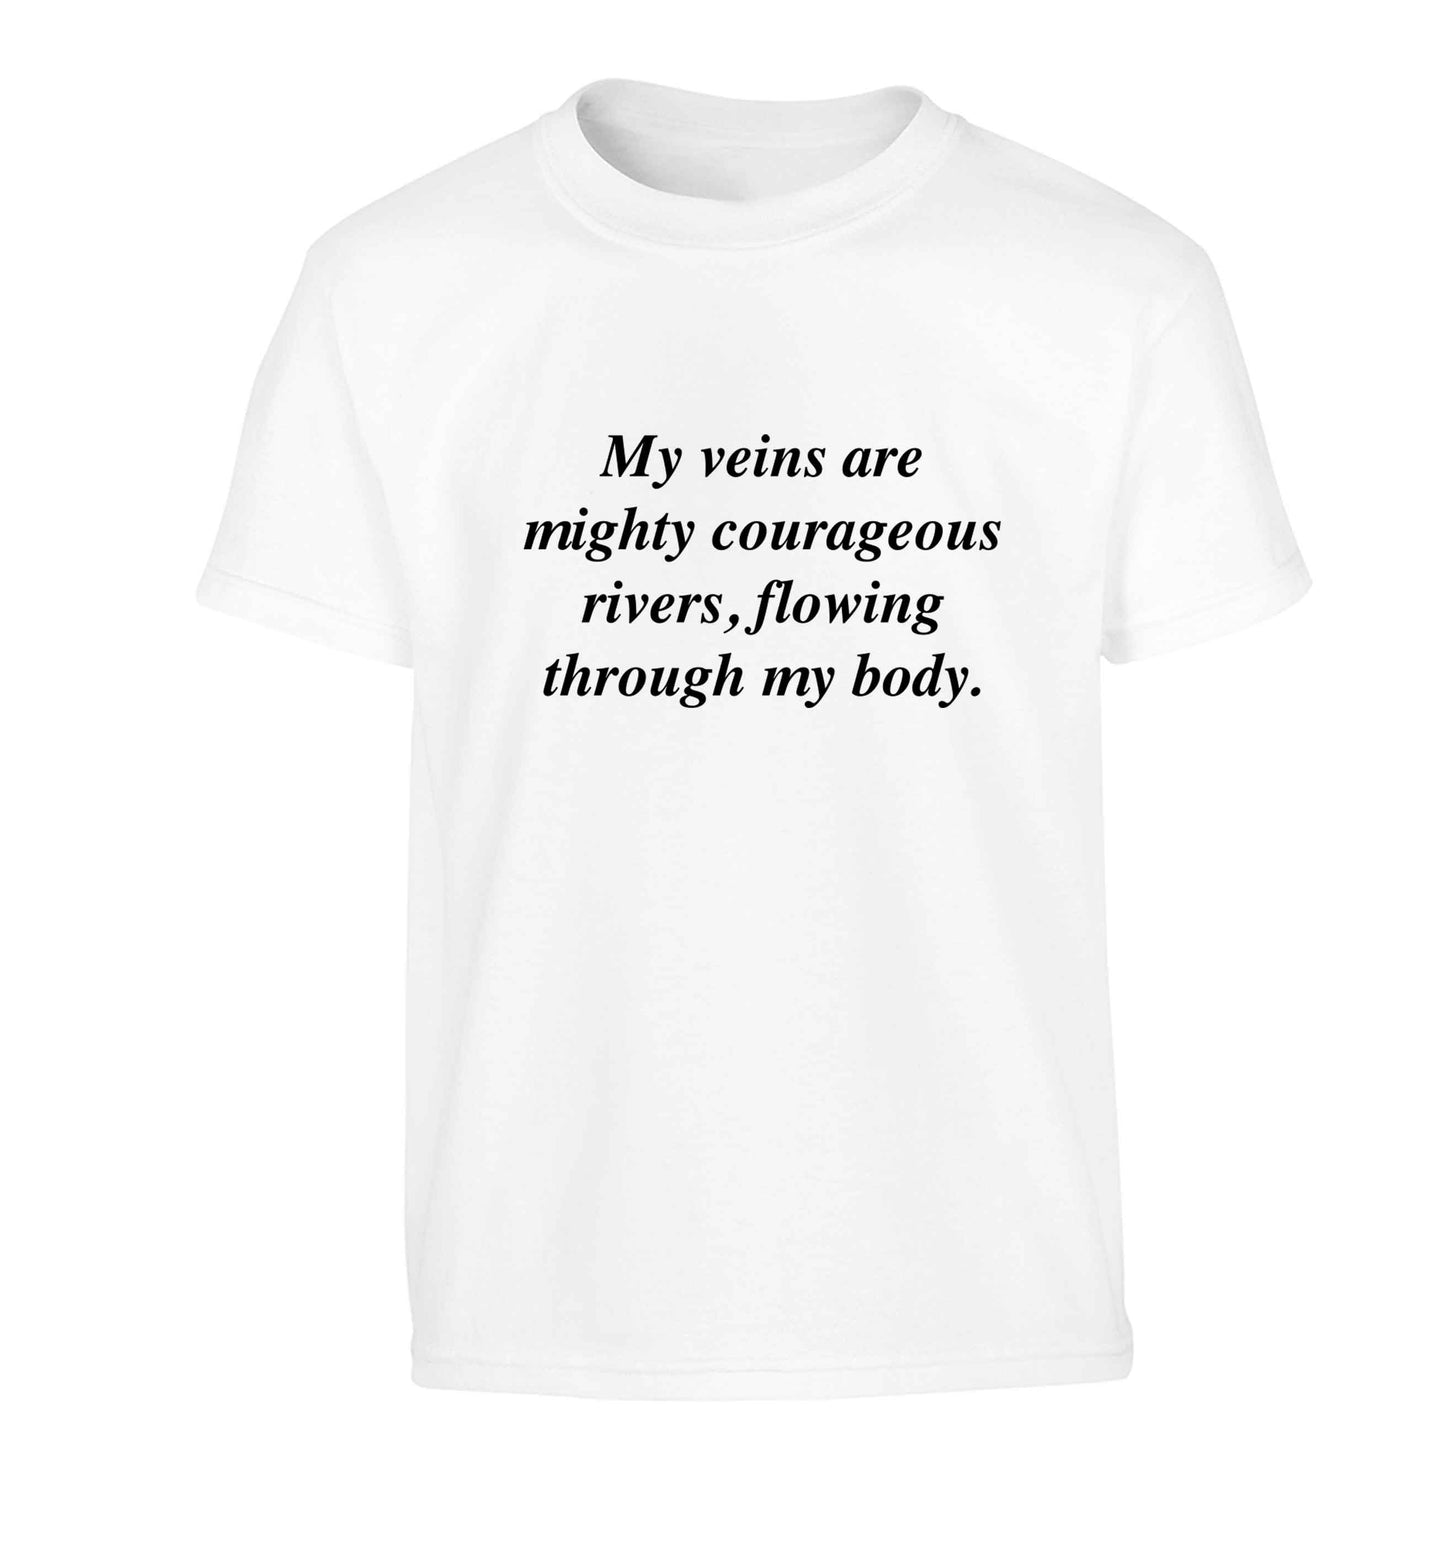 My veins are mighty courageous rivers, flowing through my body Children's white Tshirt 12-13 Years